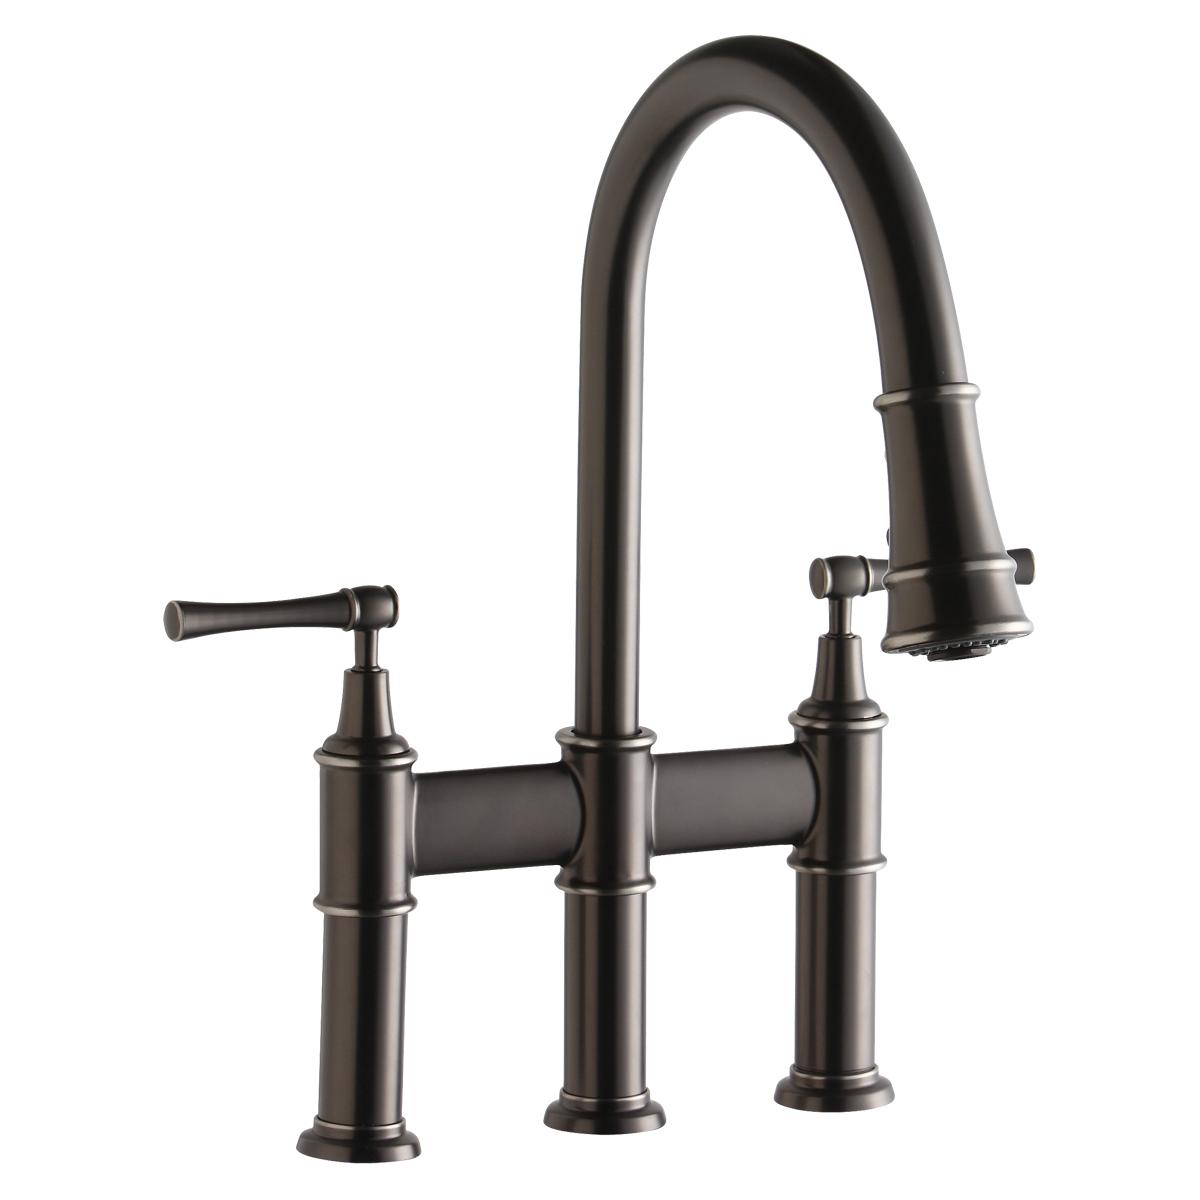 Elkay Explore Three Hole Bridge Faucet with Pull-down Spray and Lever Handles